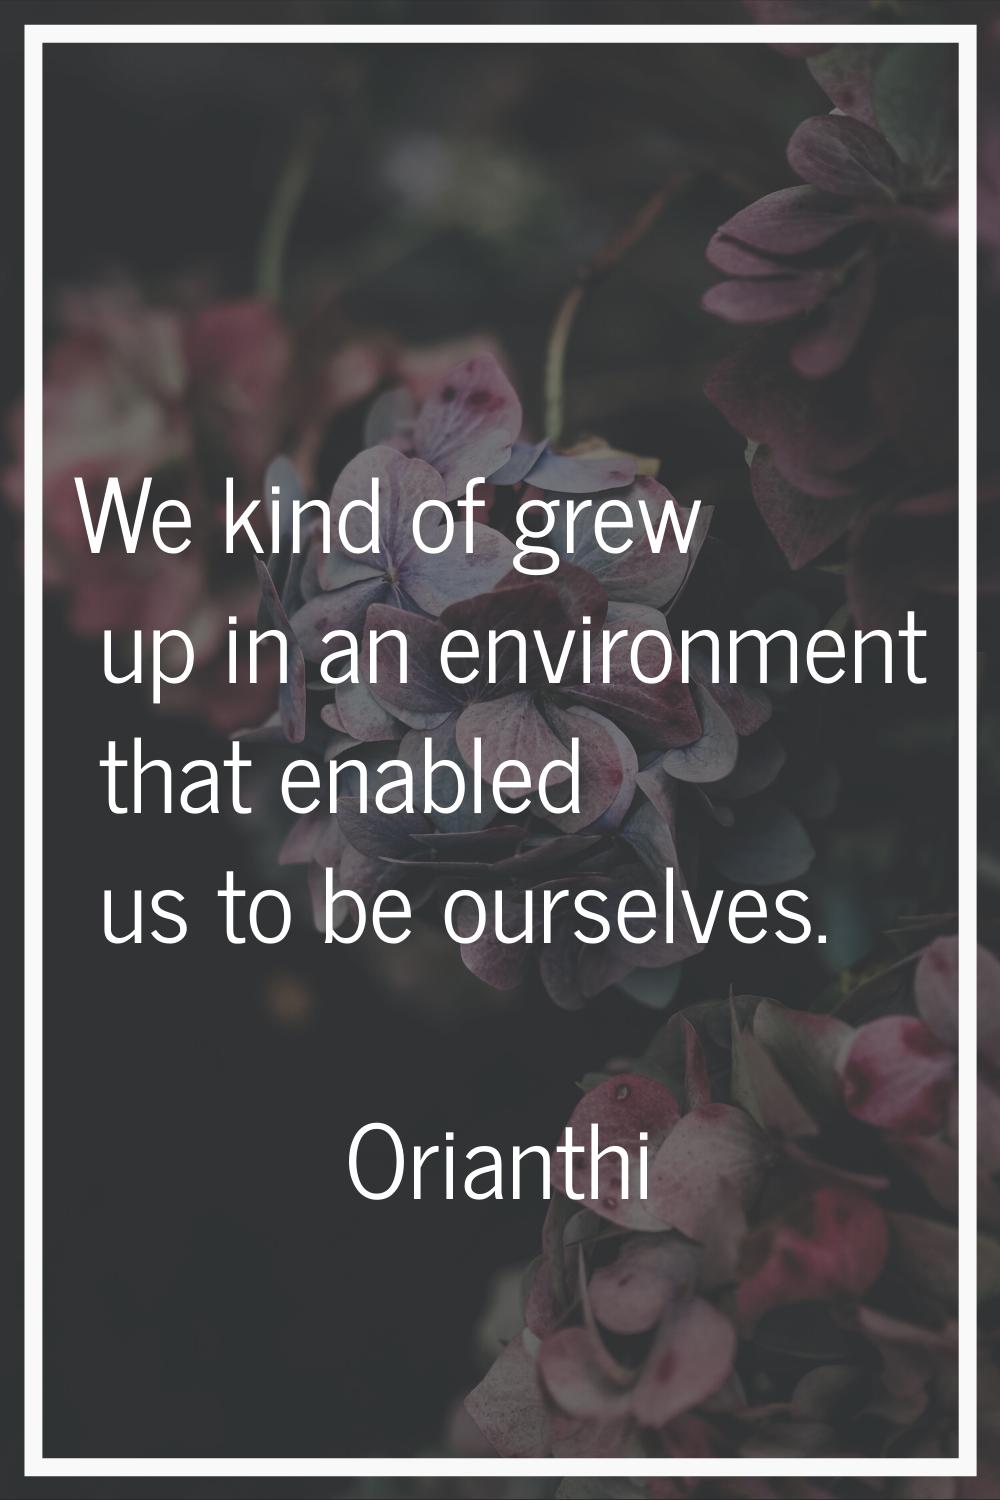 We kind of grew up in an environment that enabled us to be ourselves.